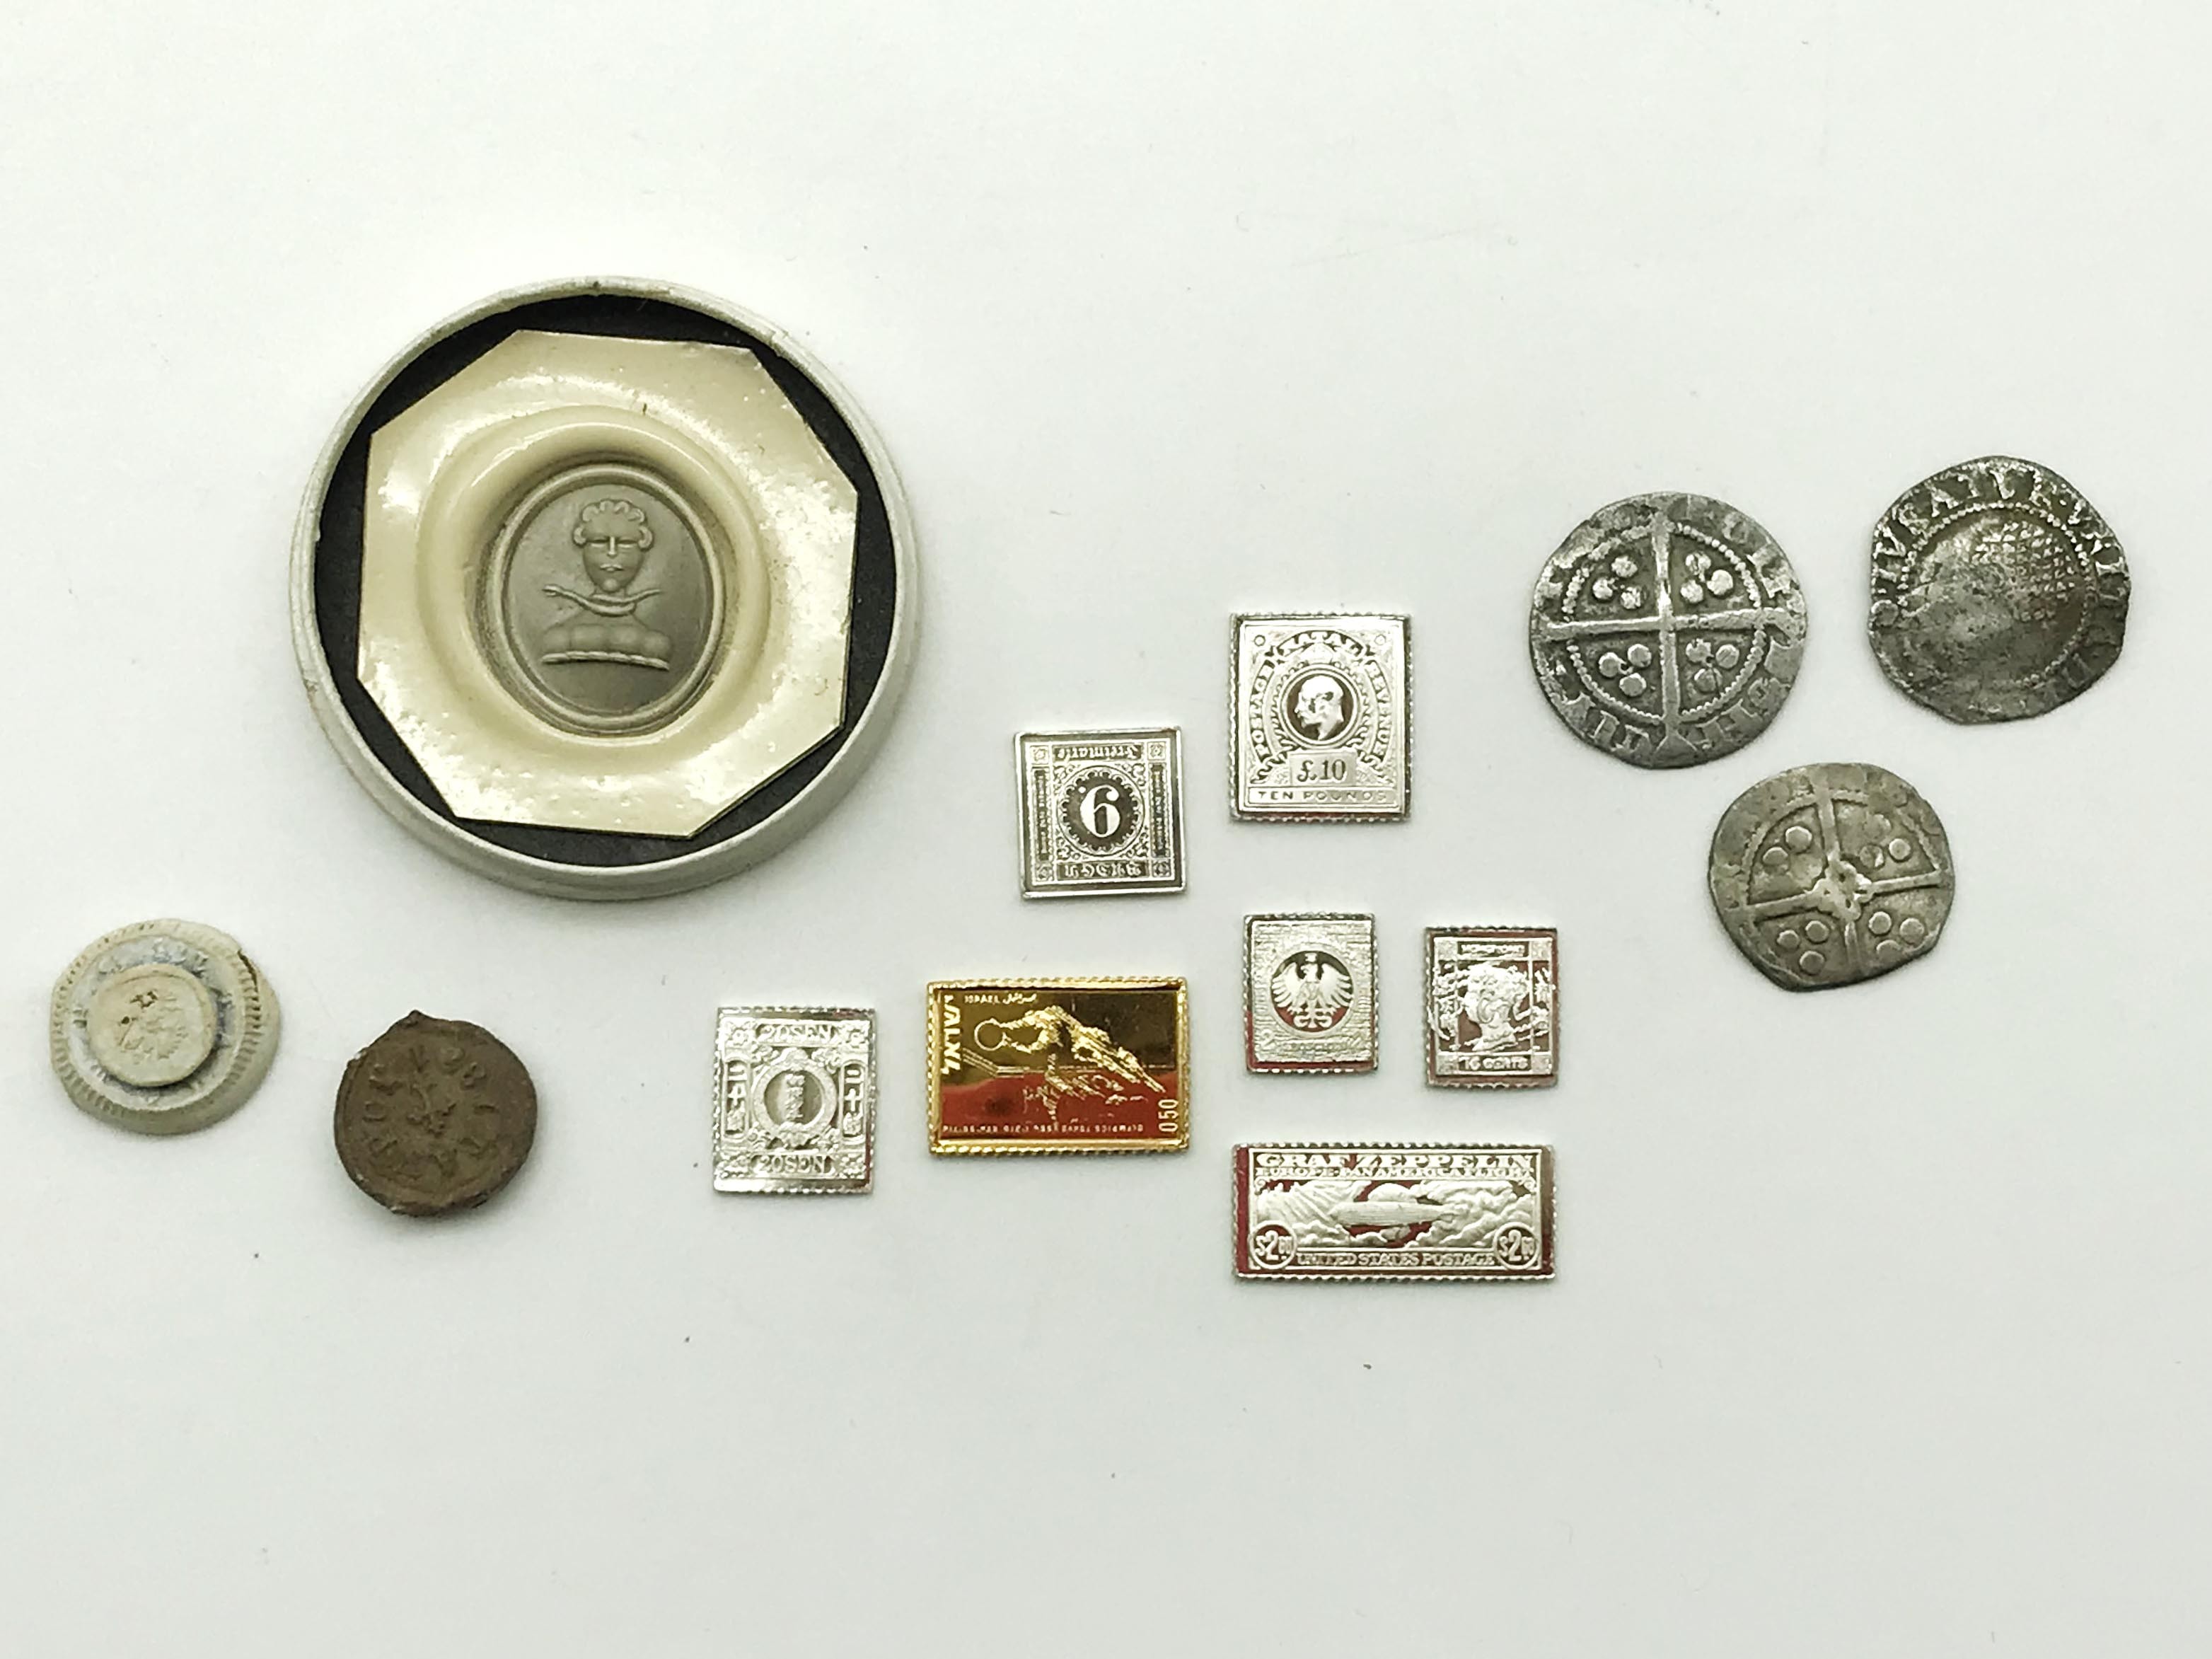 SMALL GROUP OF INTERESTING ITEMS INCLUDING HAMMERED COINS & MINIATURE SILVER STAMP INGOTS - Image 3 of 9